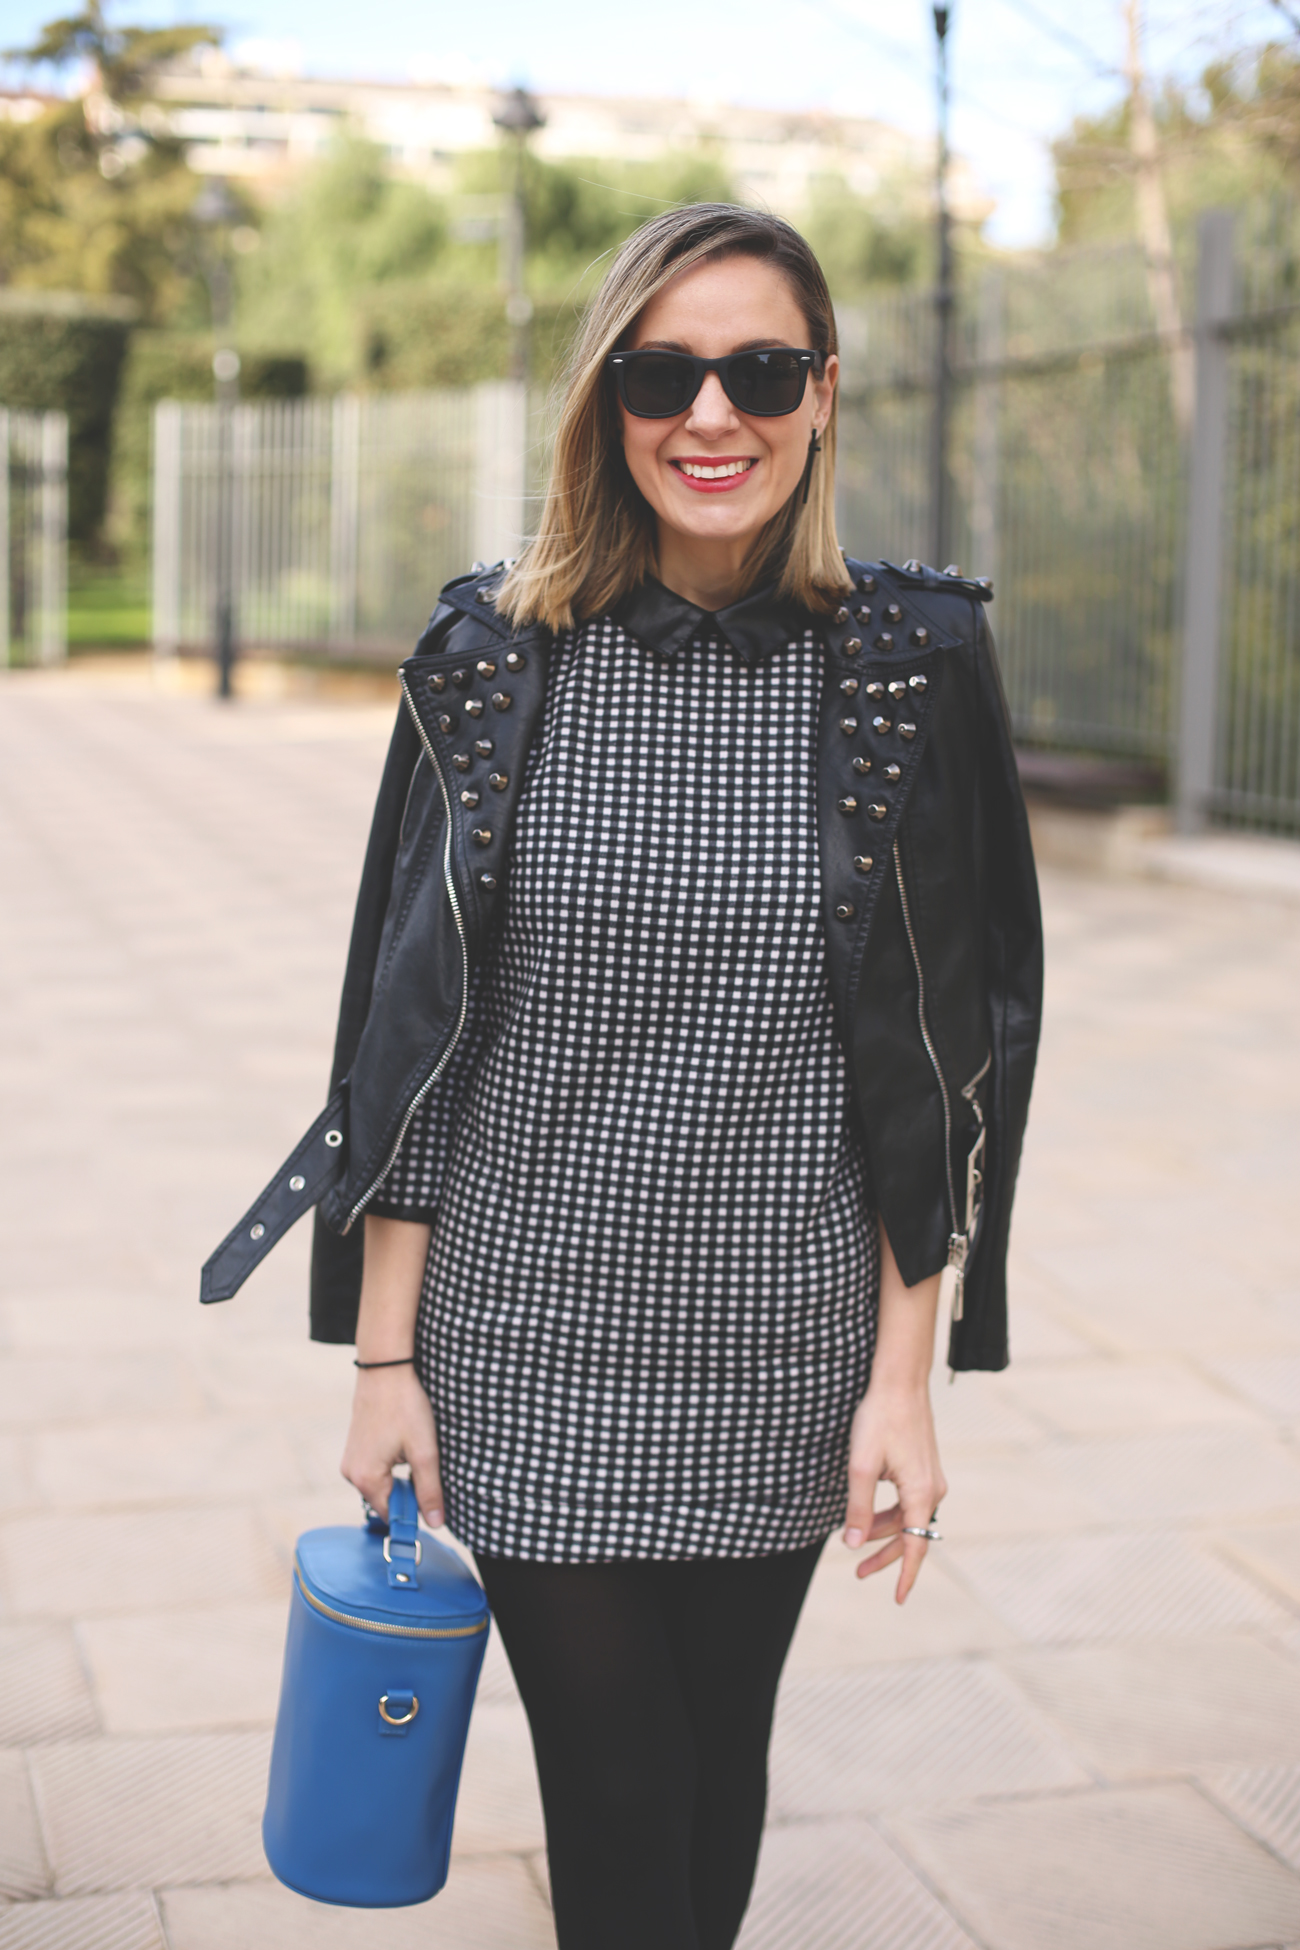 Winter look, black and white, leather, studded jacket, mod style, alexa chung, outfit, fashion blogger, red lips, vichy, dress